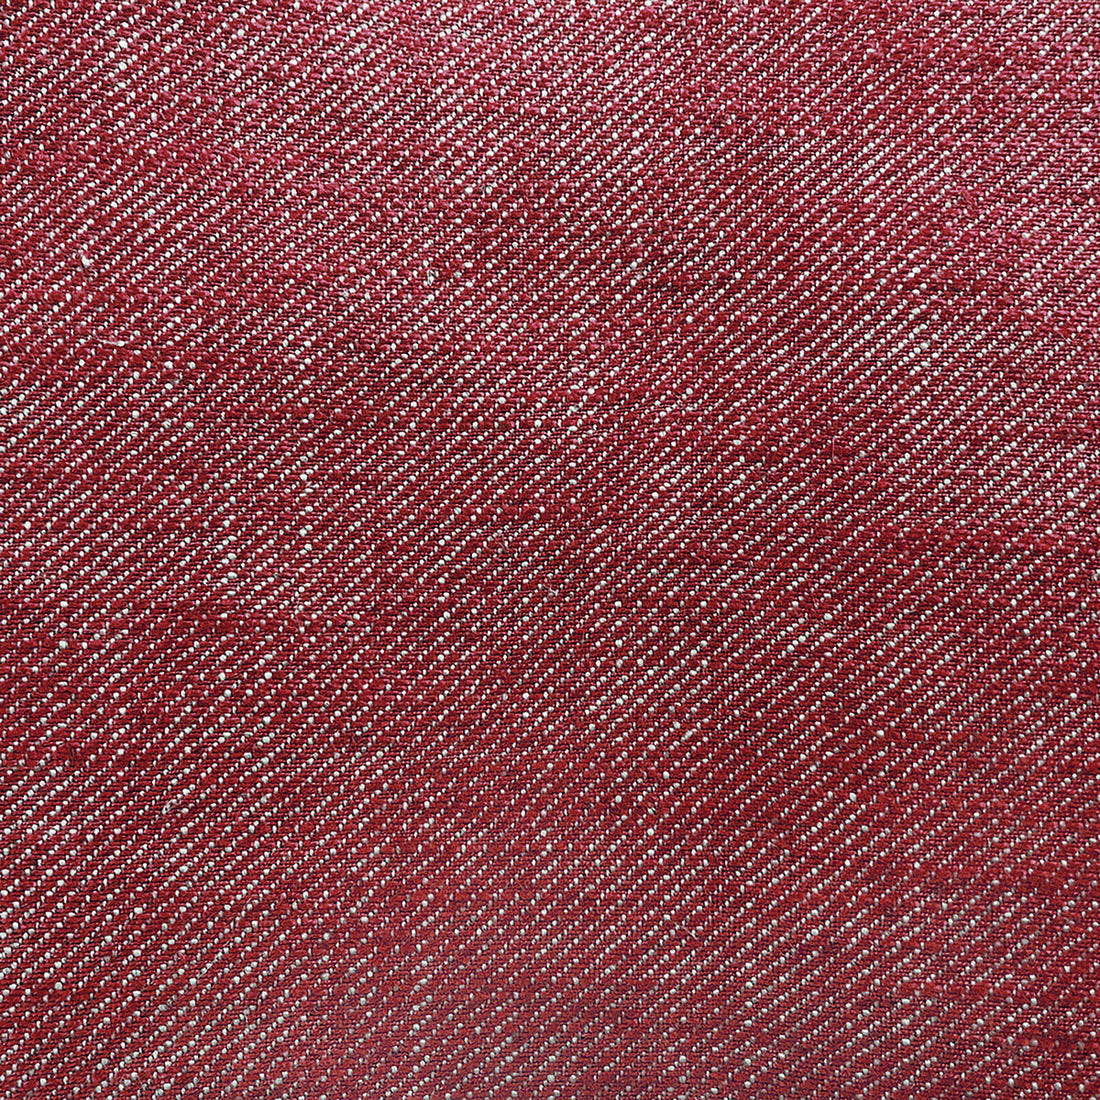 Hisa fabric in vino color - pattern GDT5639.011.0 - by Gaston y Daniela in the Gaston Japon collection